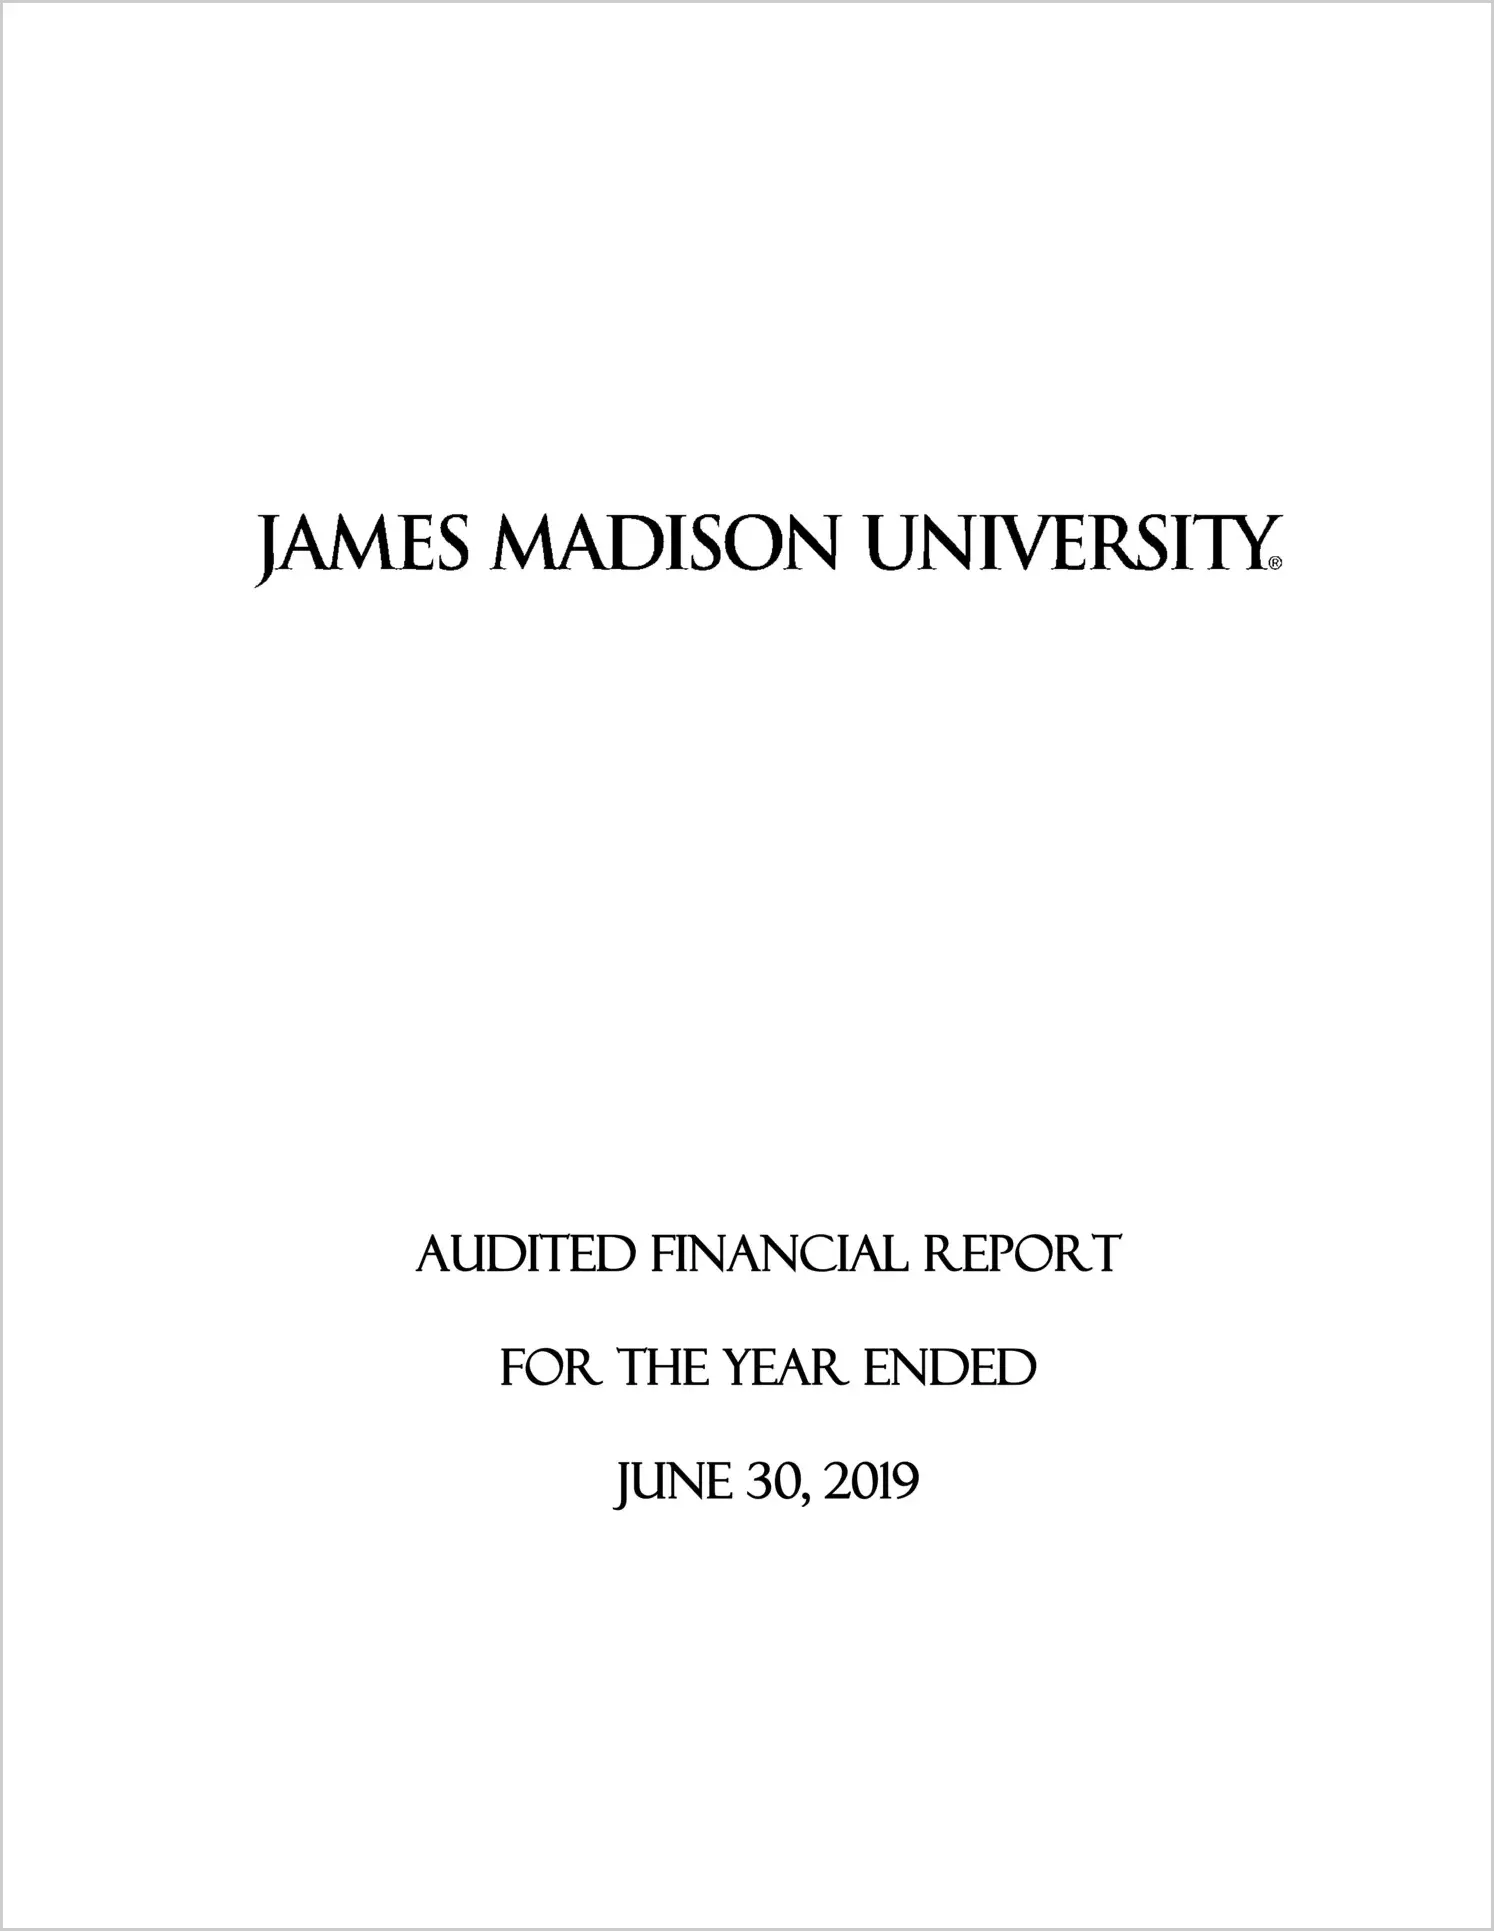 James Madison University Financial Statements for the year ended June 30, 2019